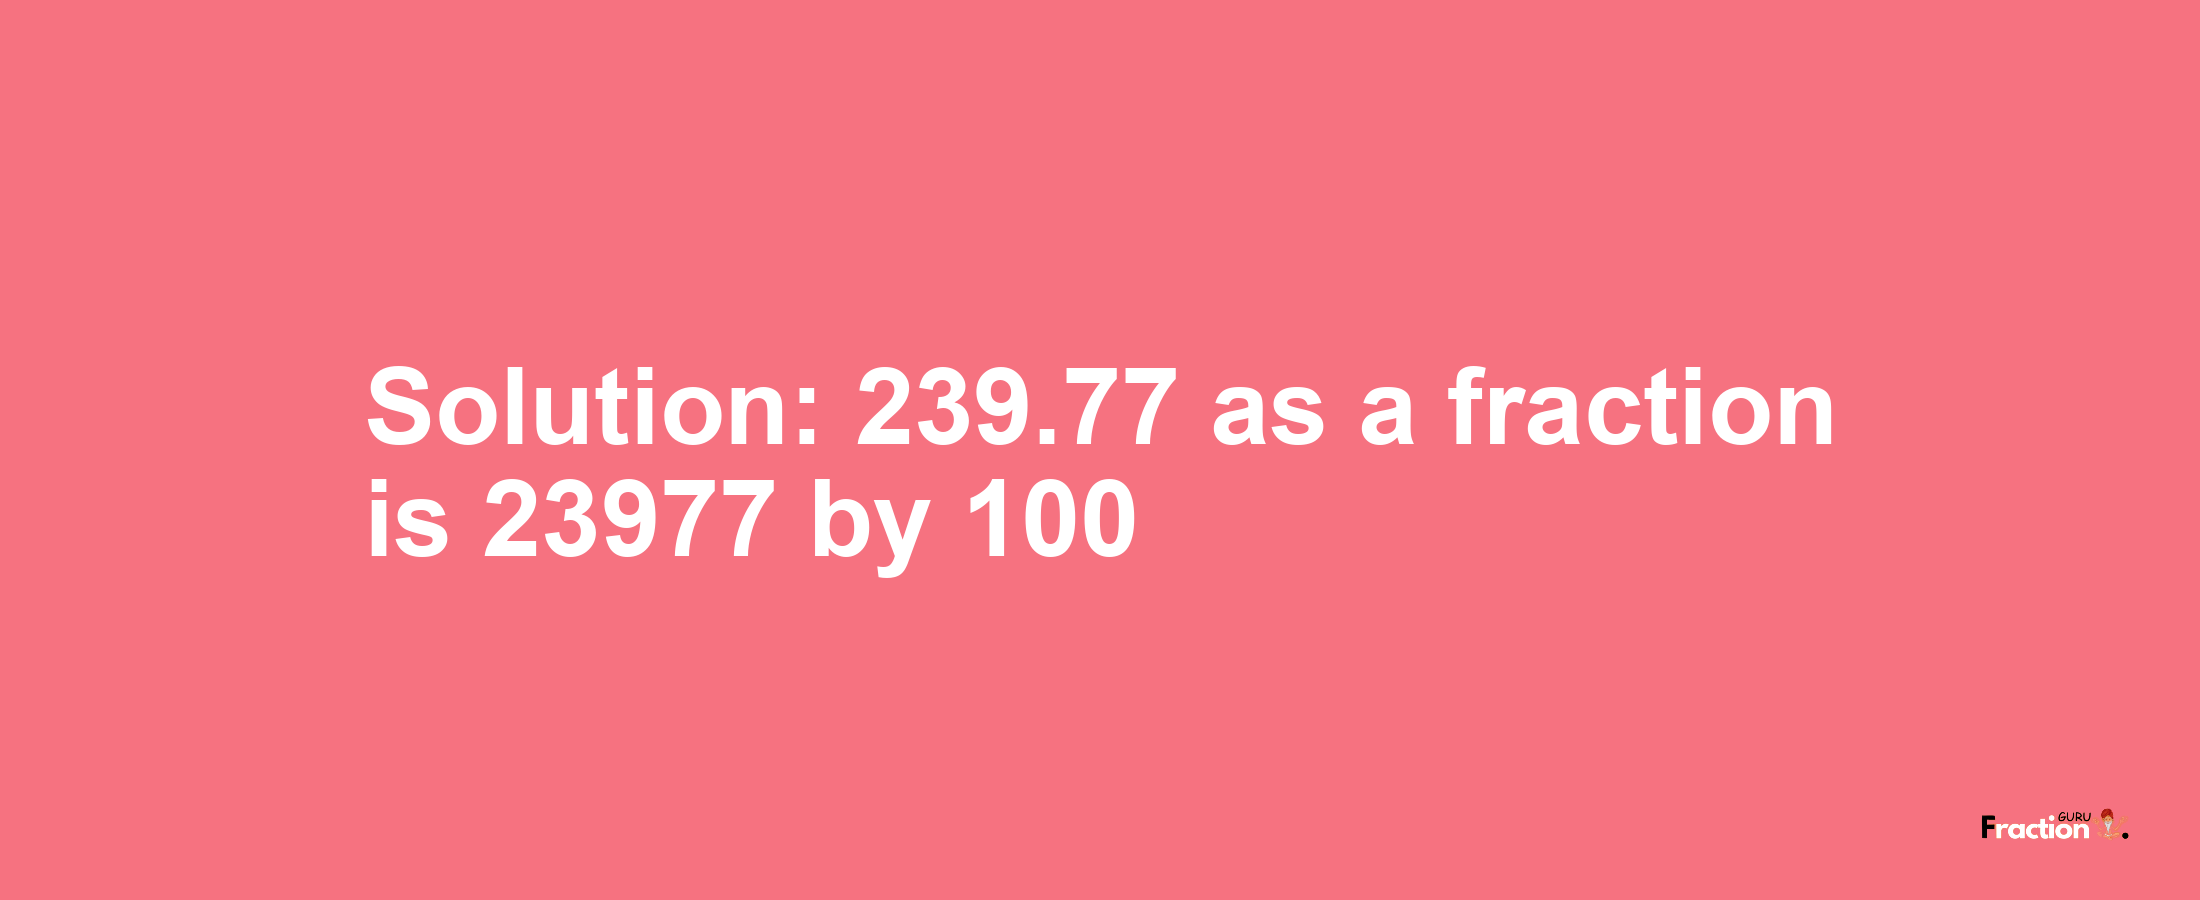 Solution:239.77 as a fraction is 23977/100